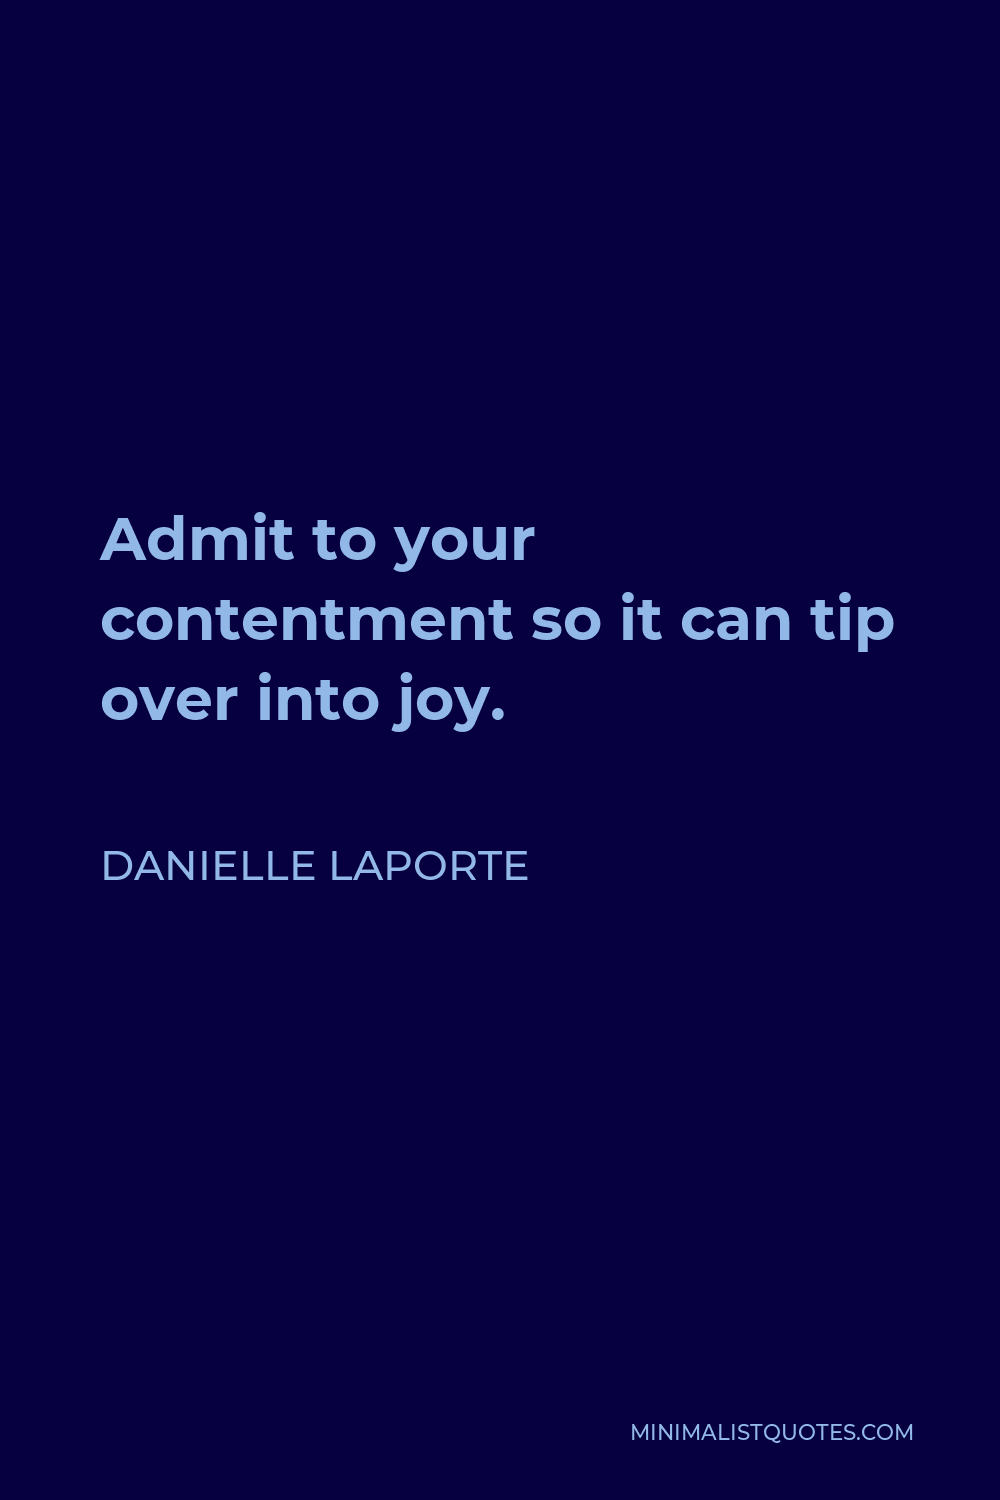 Danielle LaPorte Quote - Admit to your contentment so it can tip over into joy.